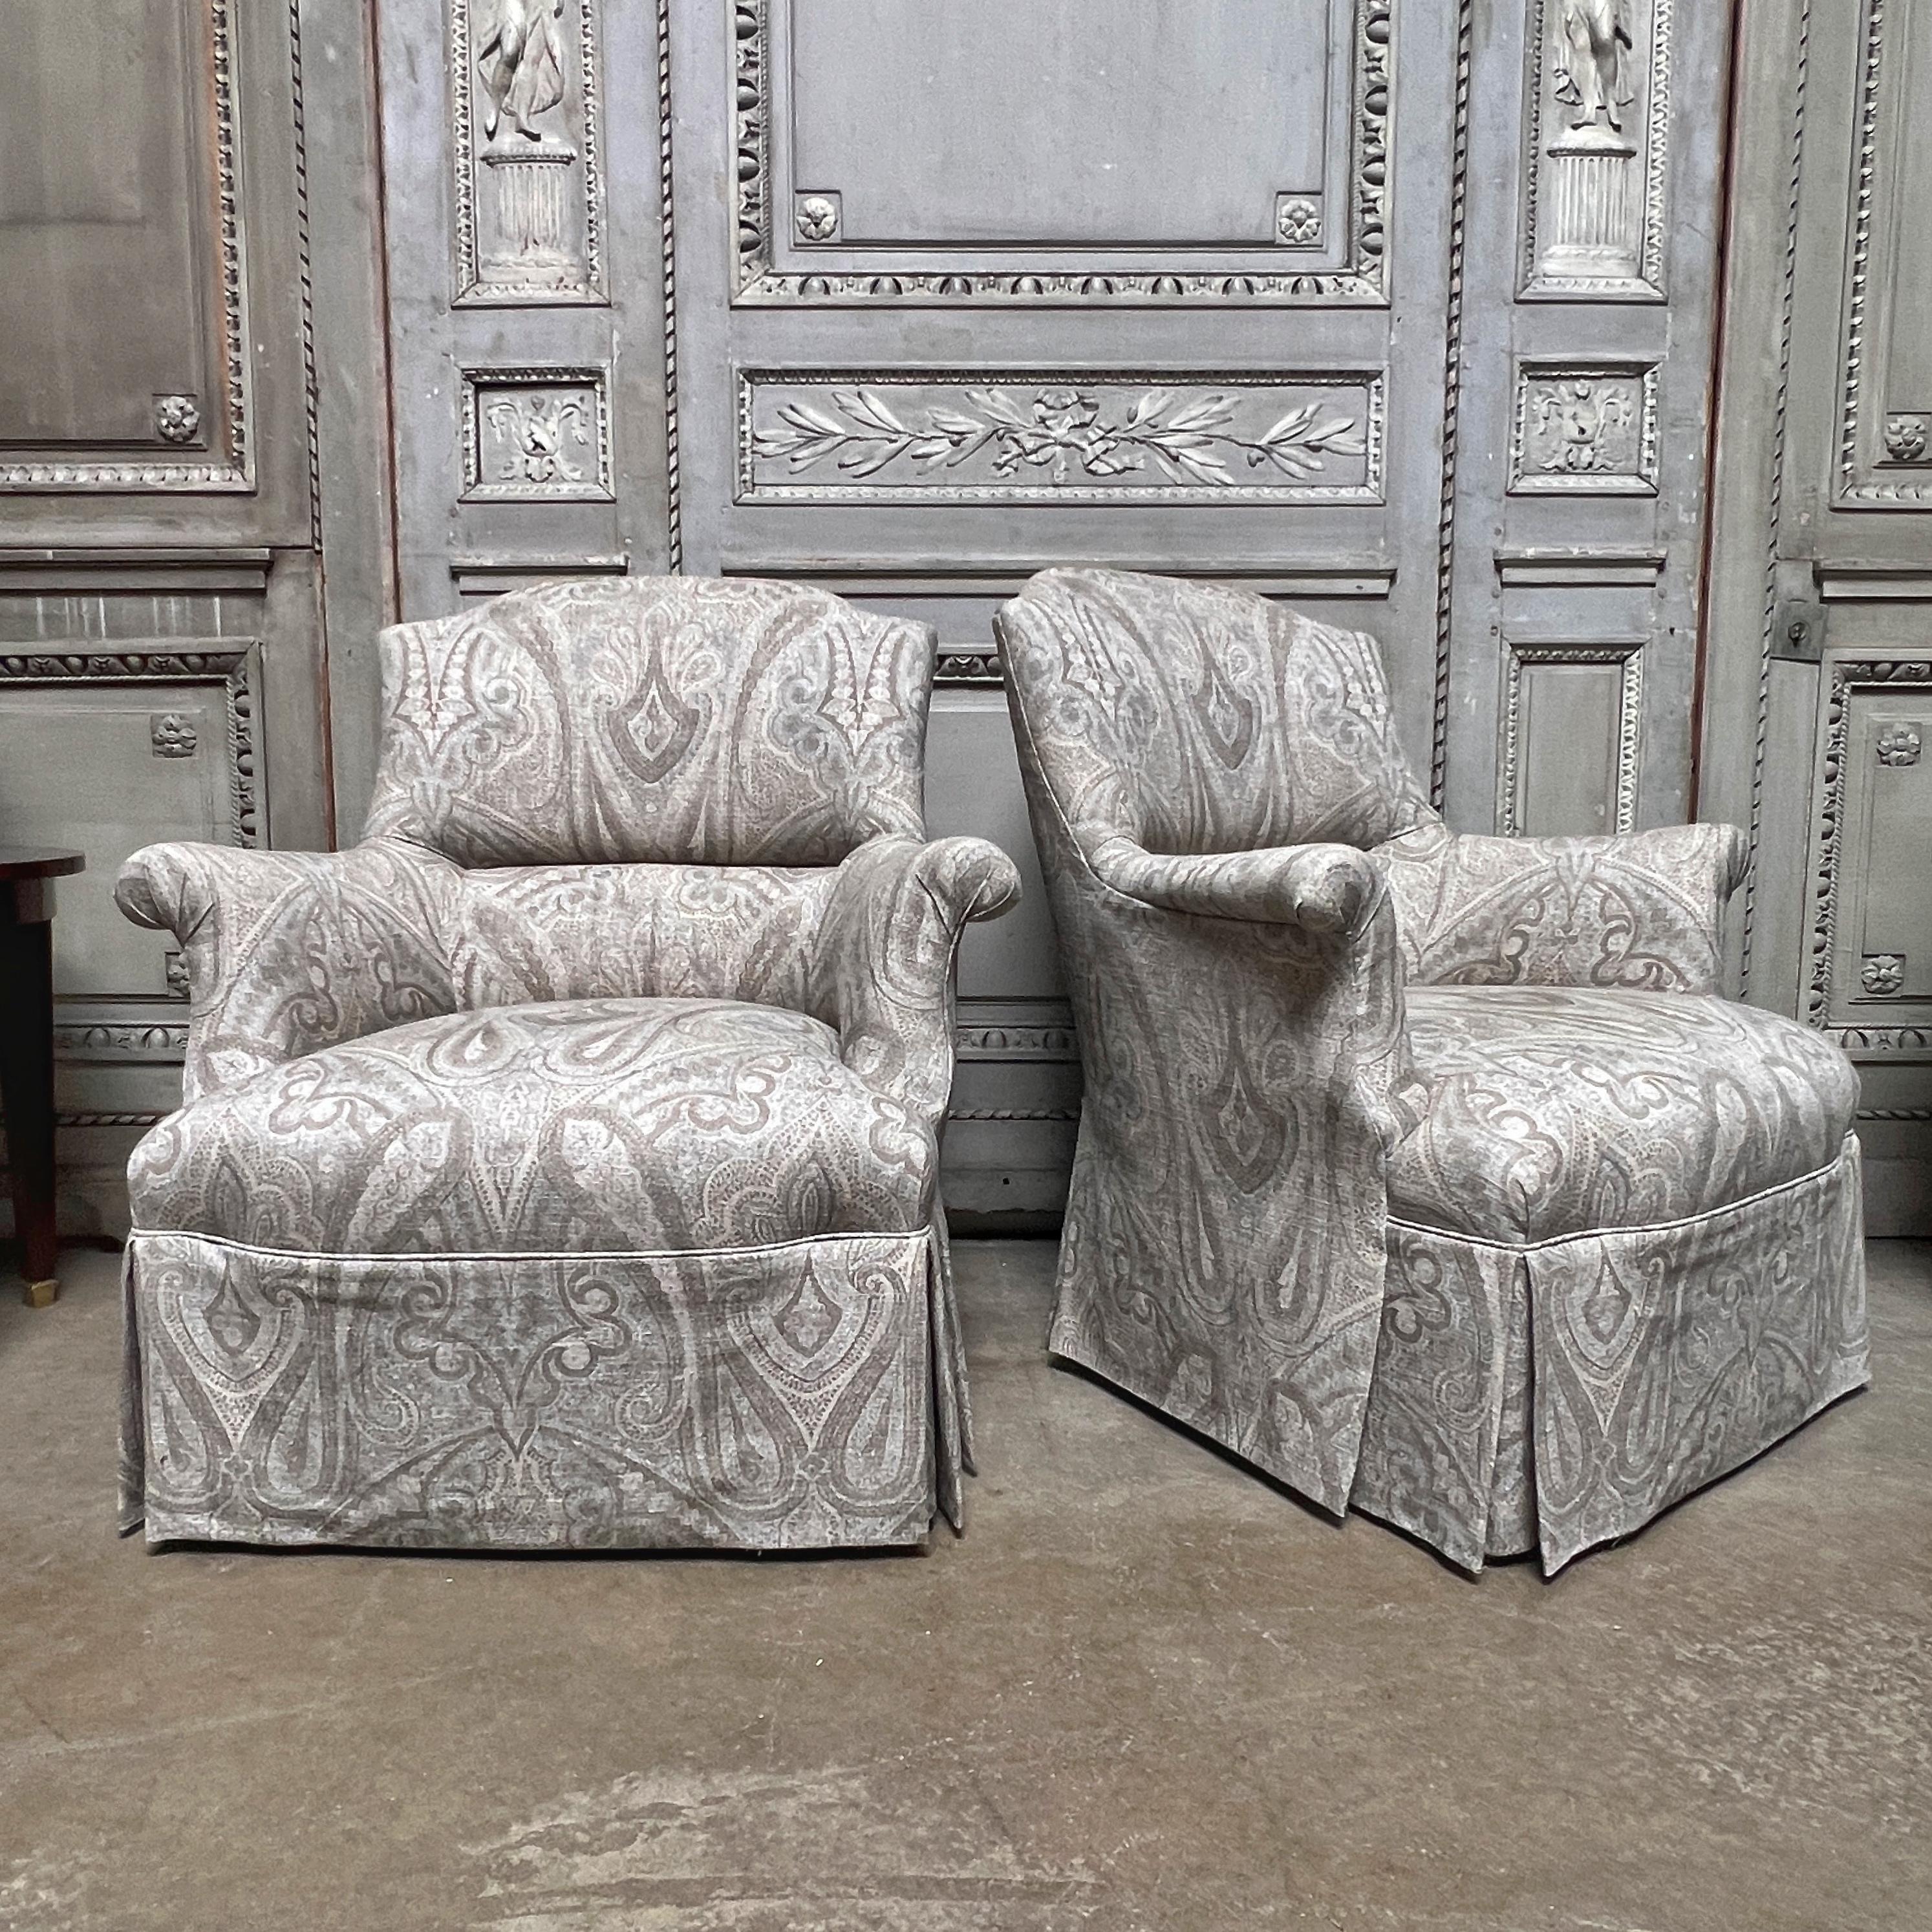 Hand-Crafted Pair of Napoleon III Style Upholstered Lounge Chairs in Gray Paisley Fabric For Sale